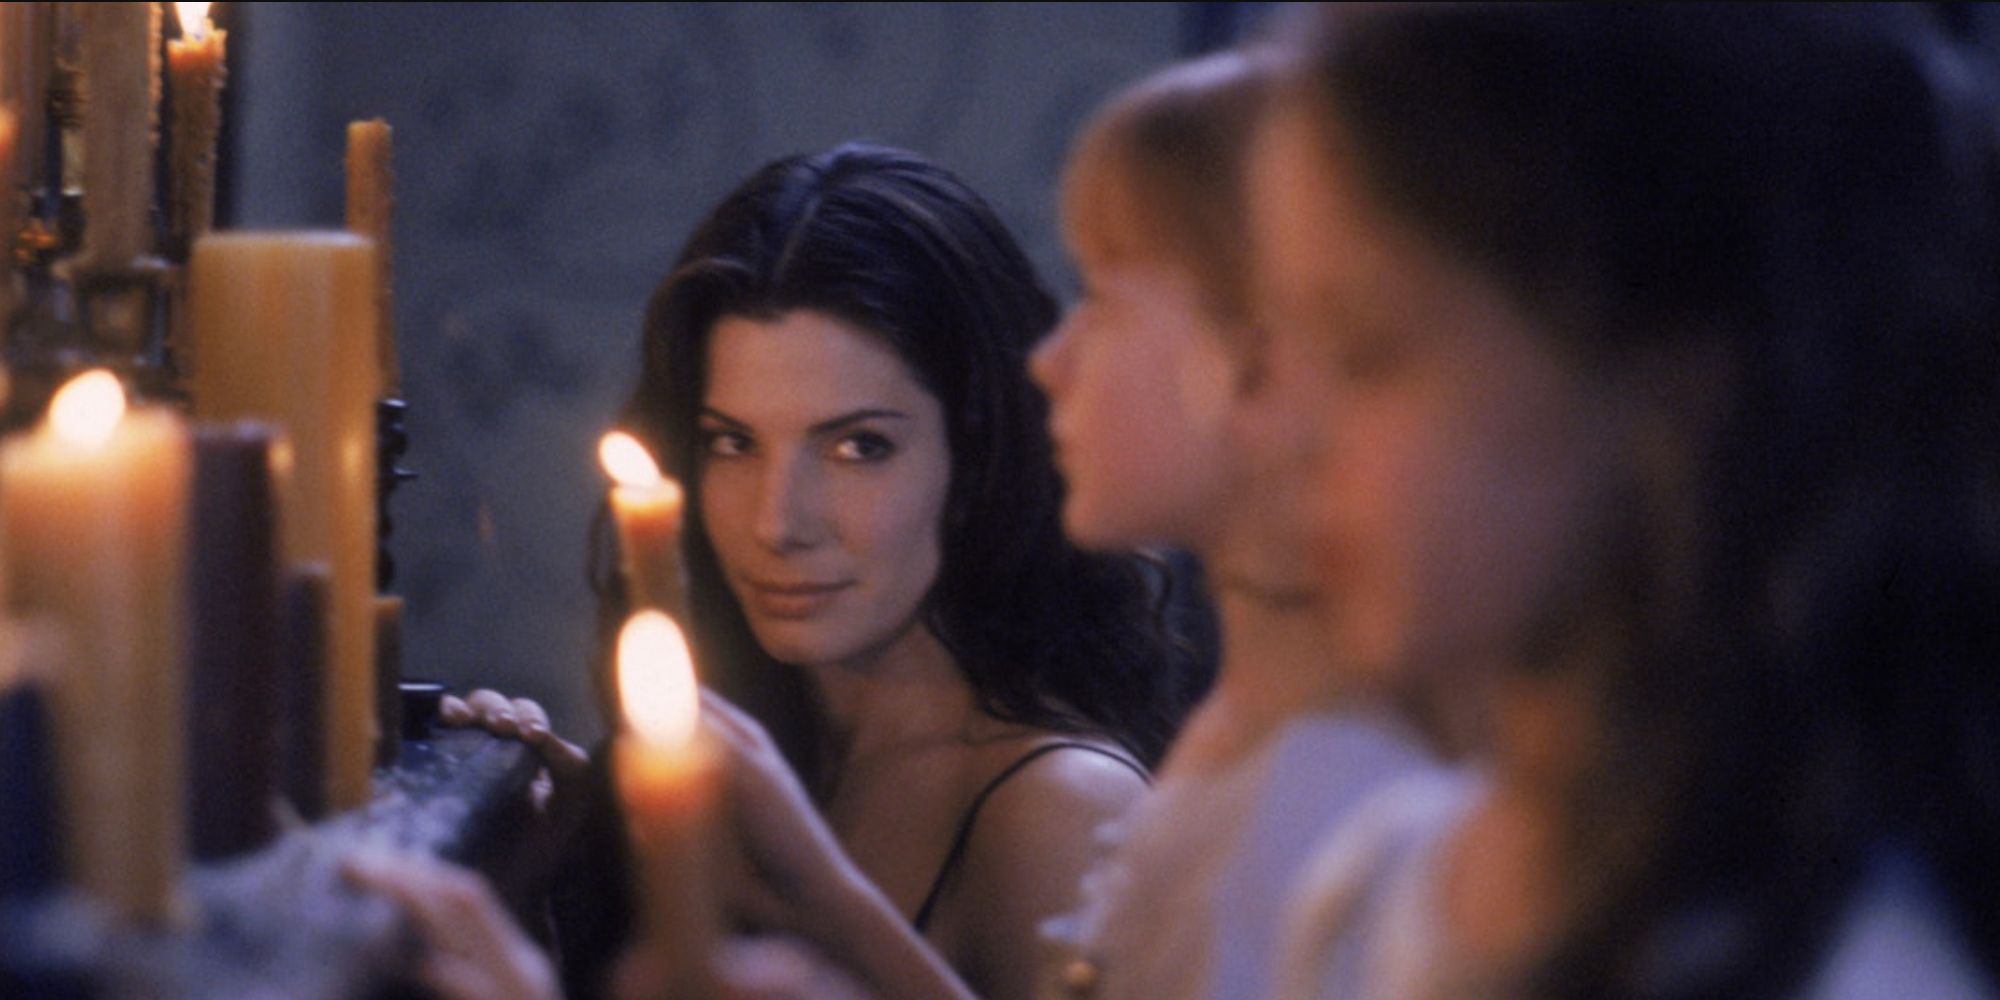 Sally and her daughters lighting candles in Practical Magic